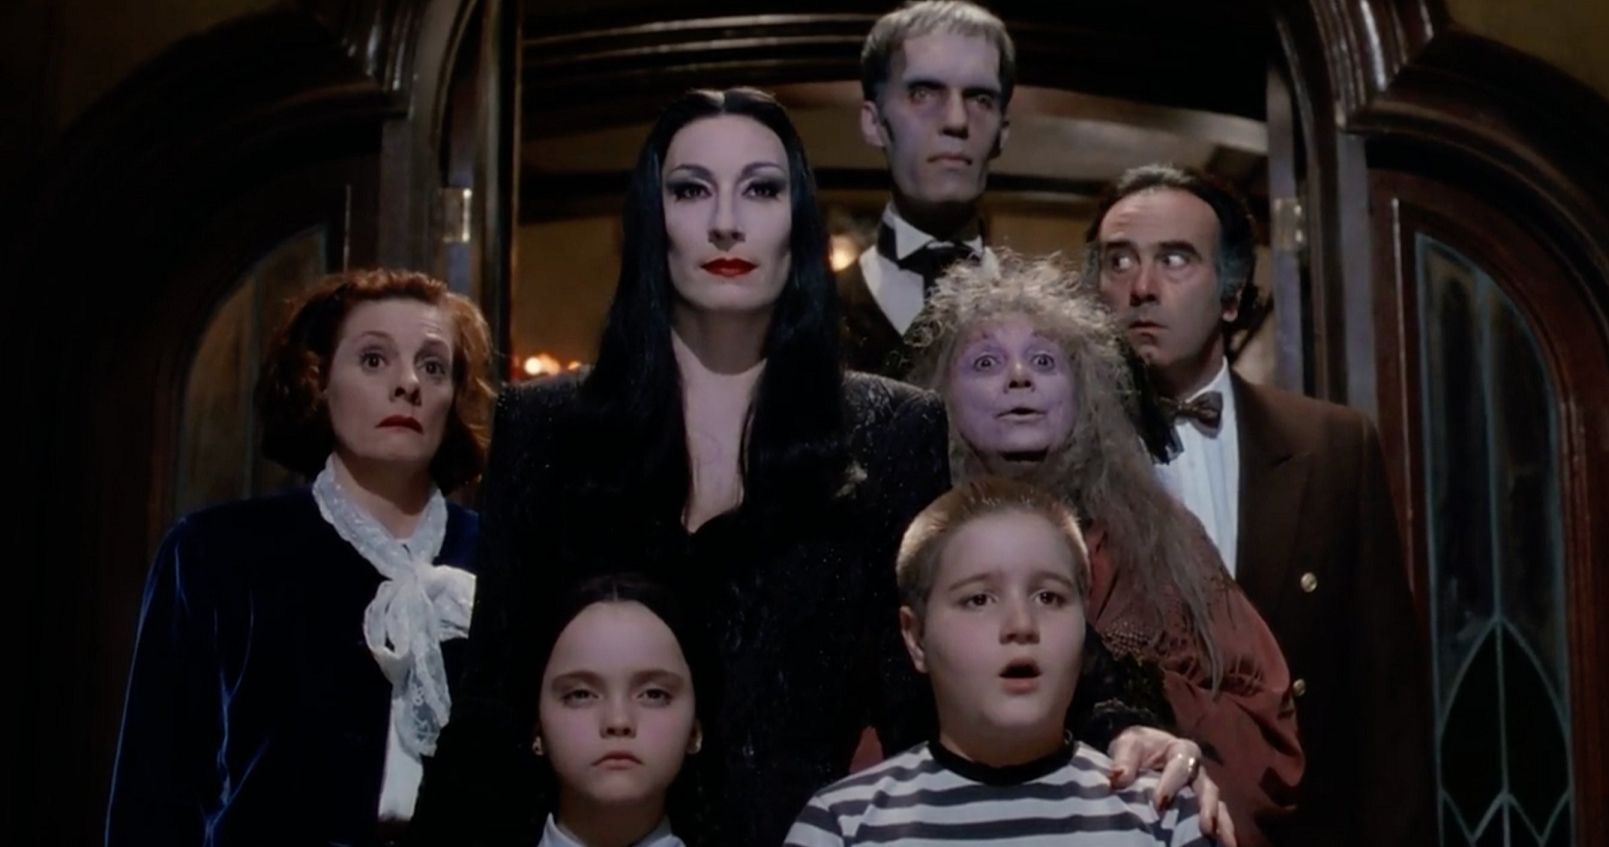 Addams Family 4K Extended Cut Will Be Released in the Fall